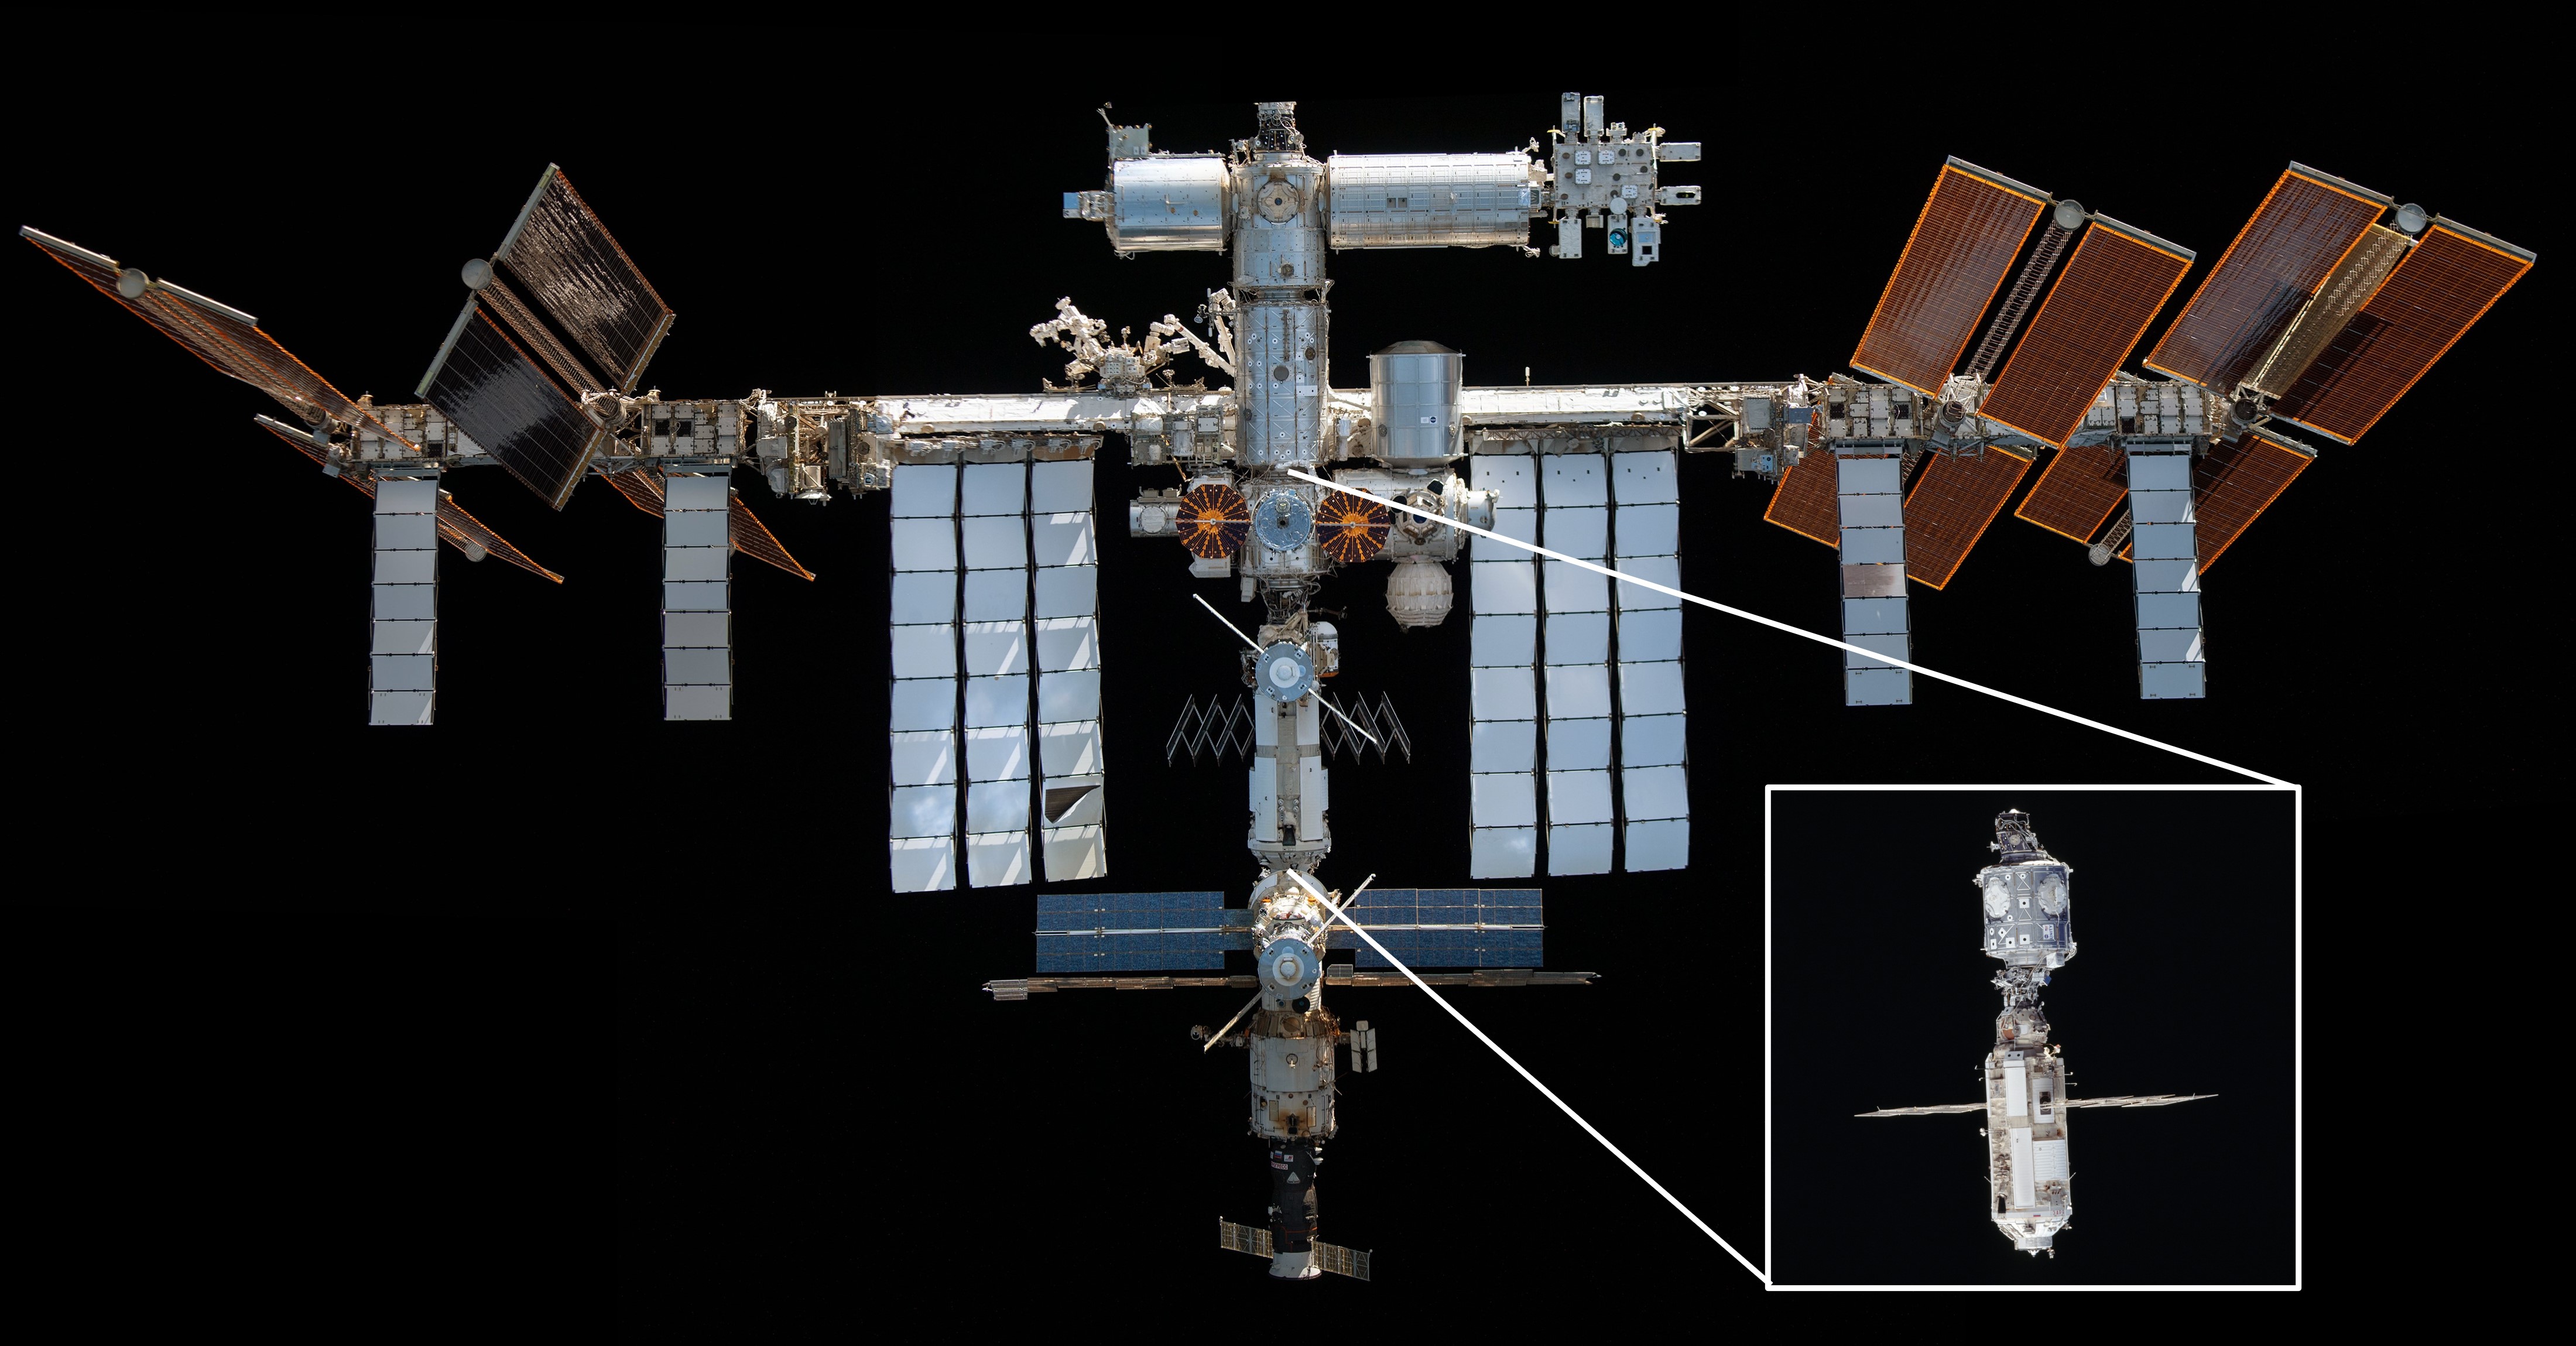 The International Space Station as it appeared in 2021, compared to Zarya and Unity at the same scale in the inset